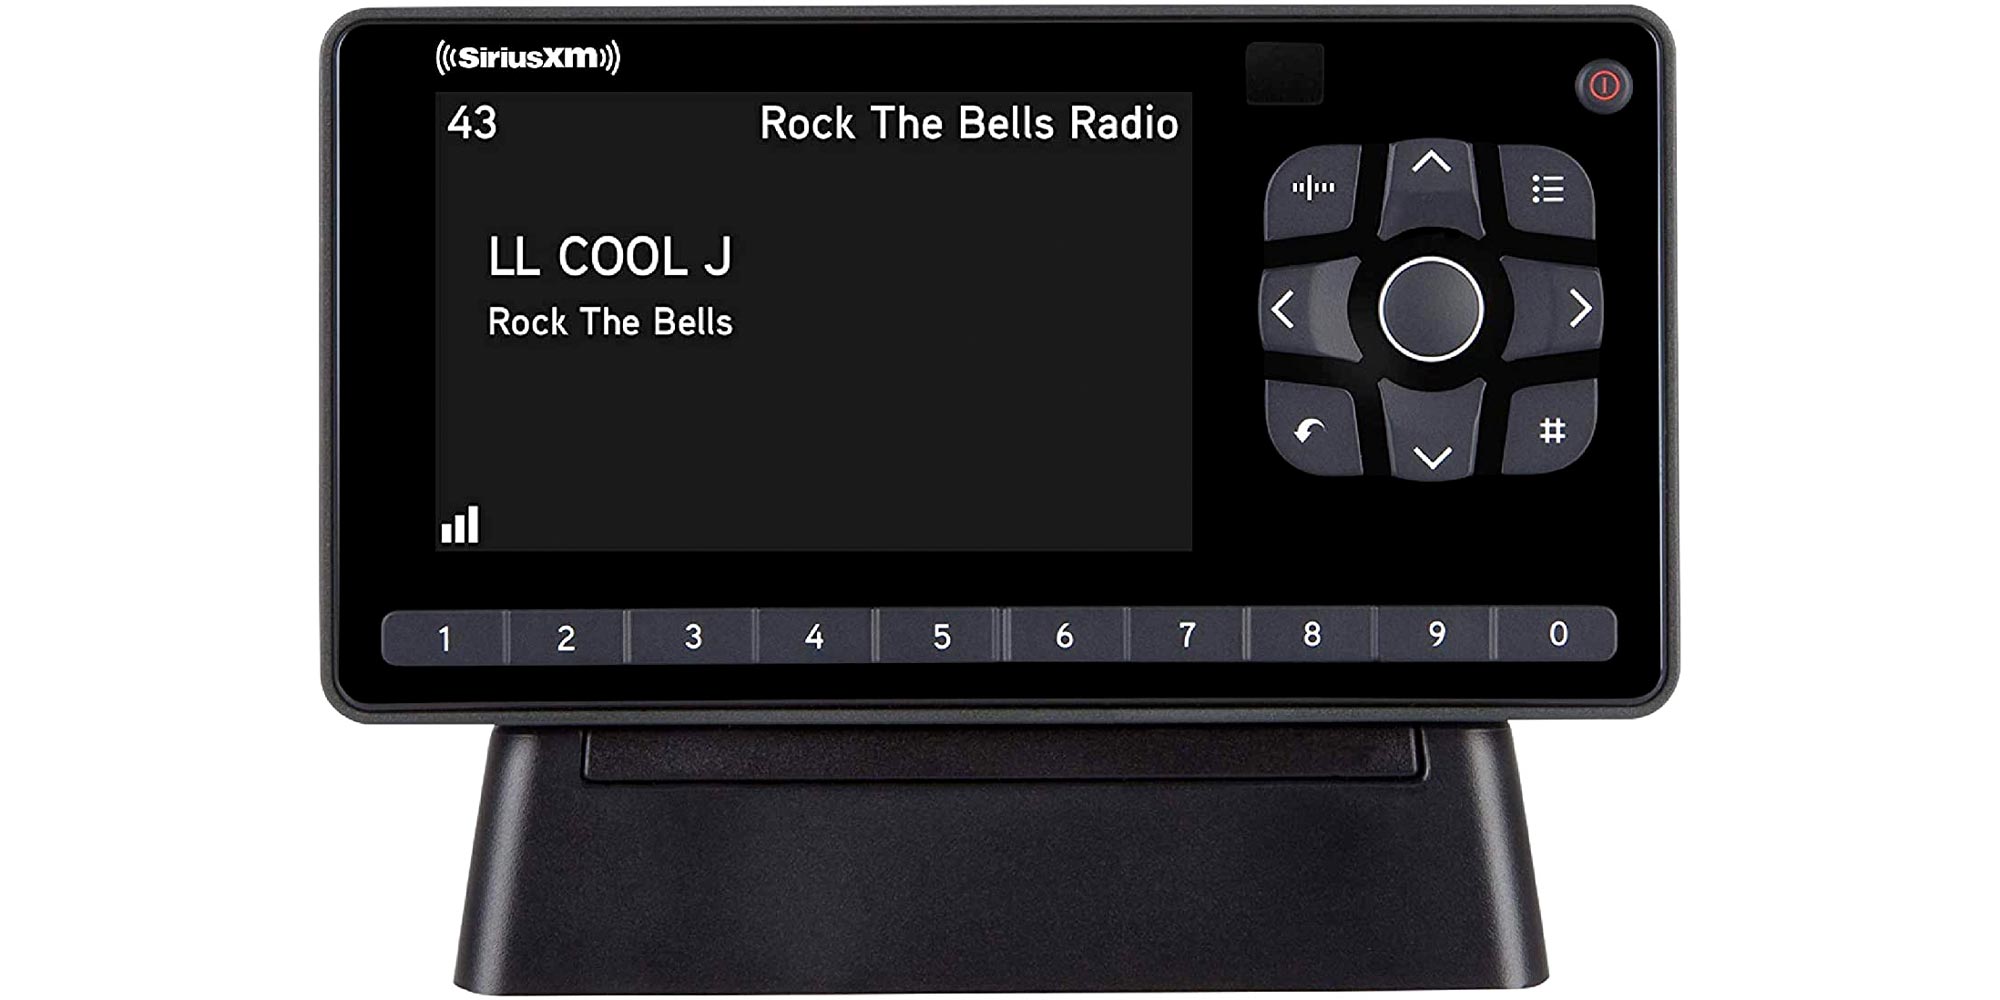 Amazon is offering the SiriusXM Onyx EZR Satellite Radio with Home Kit at $...